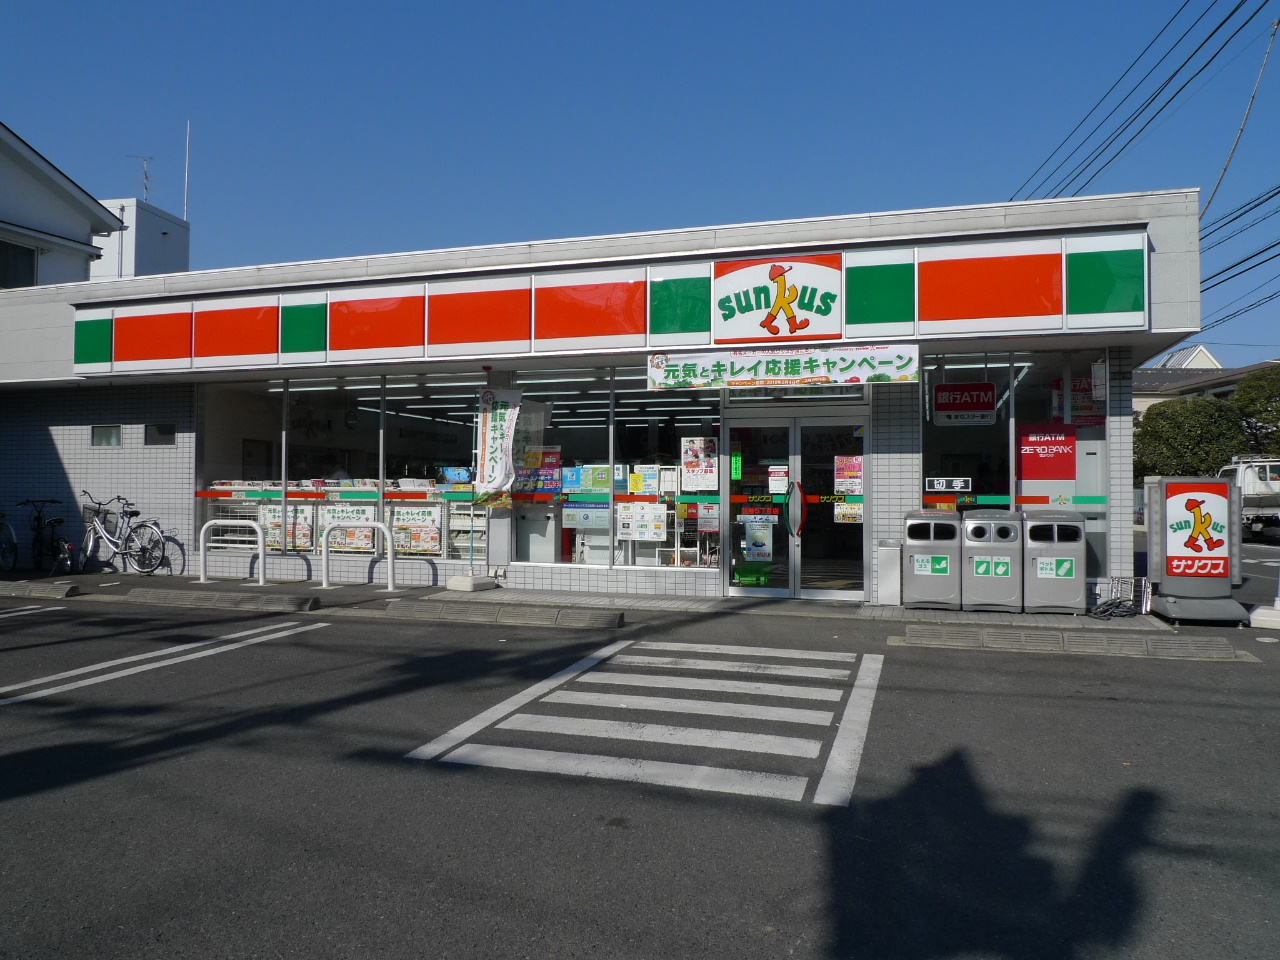 Convenience store. 246m until Thanksgiving helical 5-chome (convenience store)